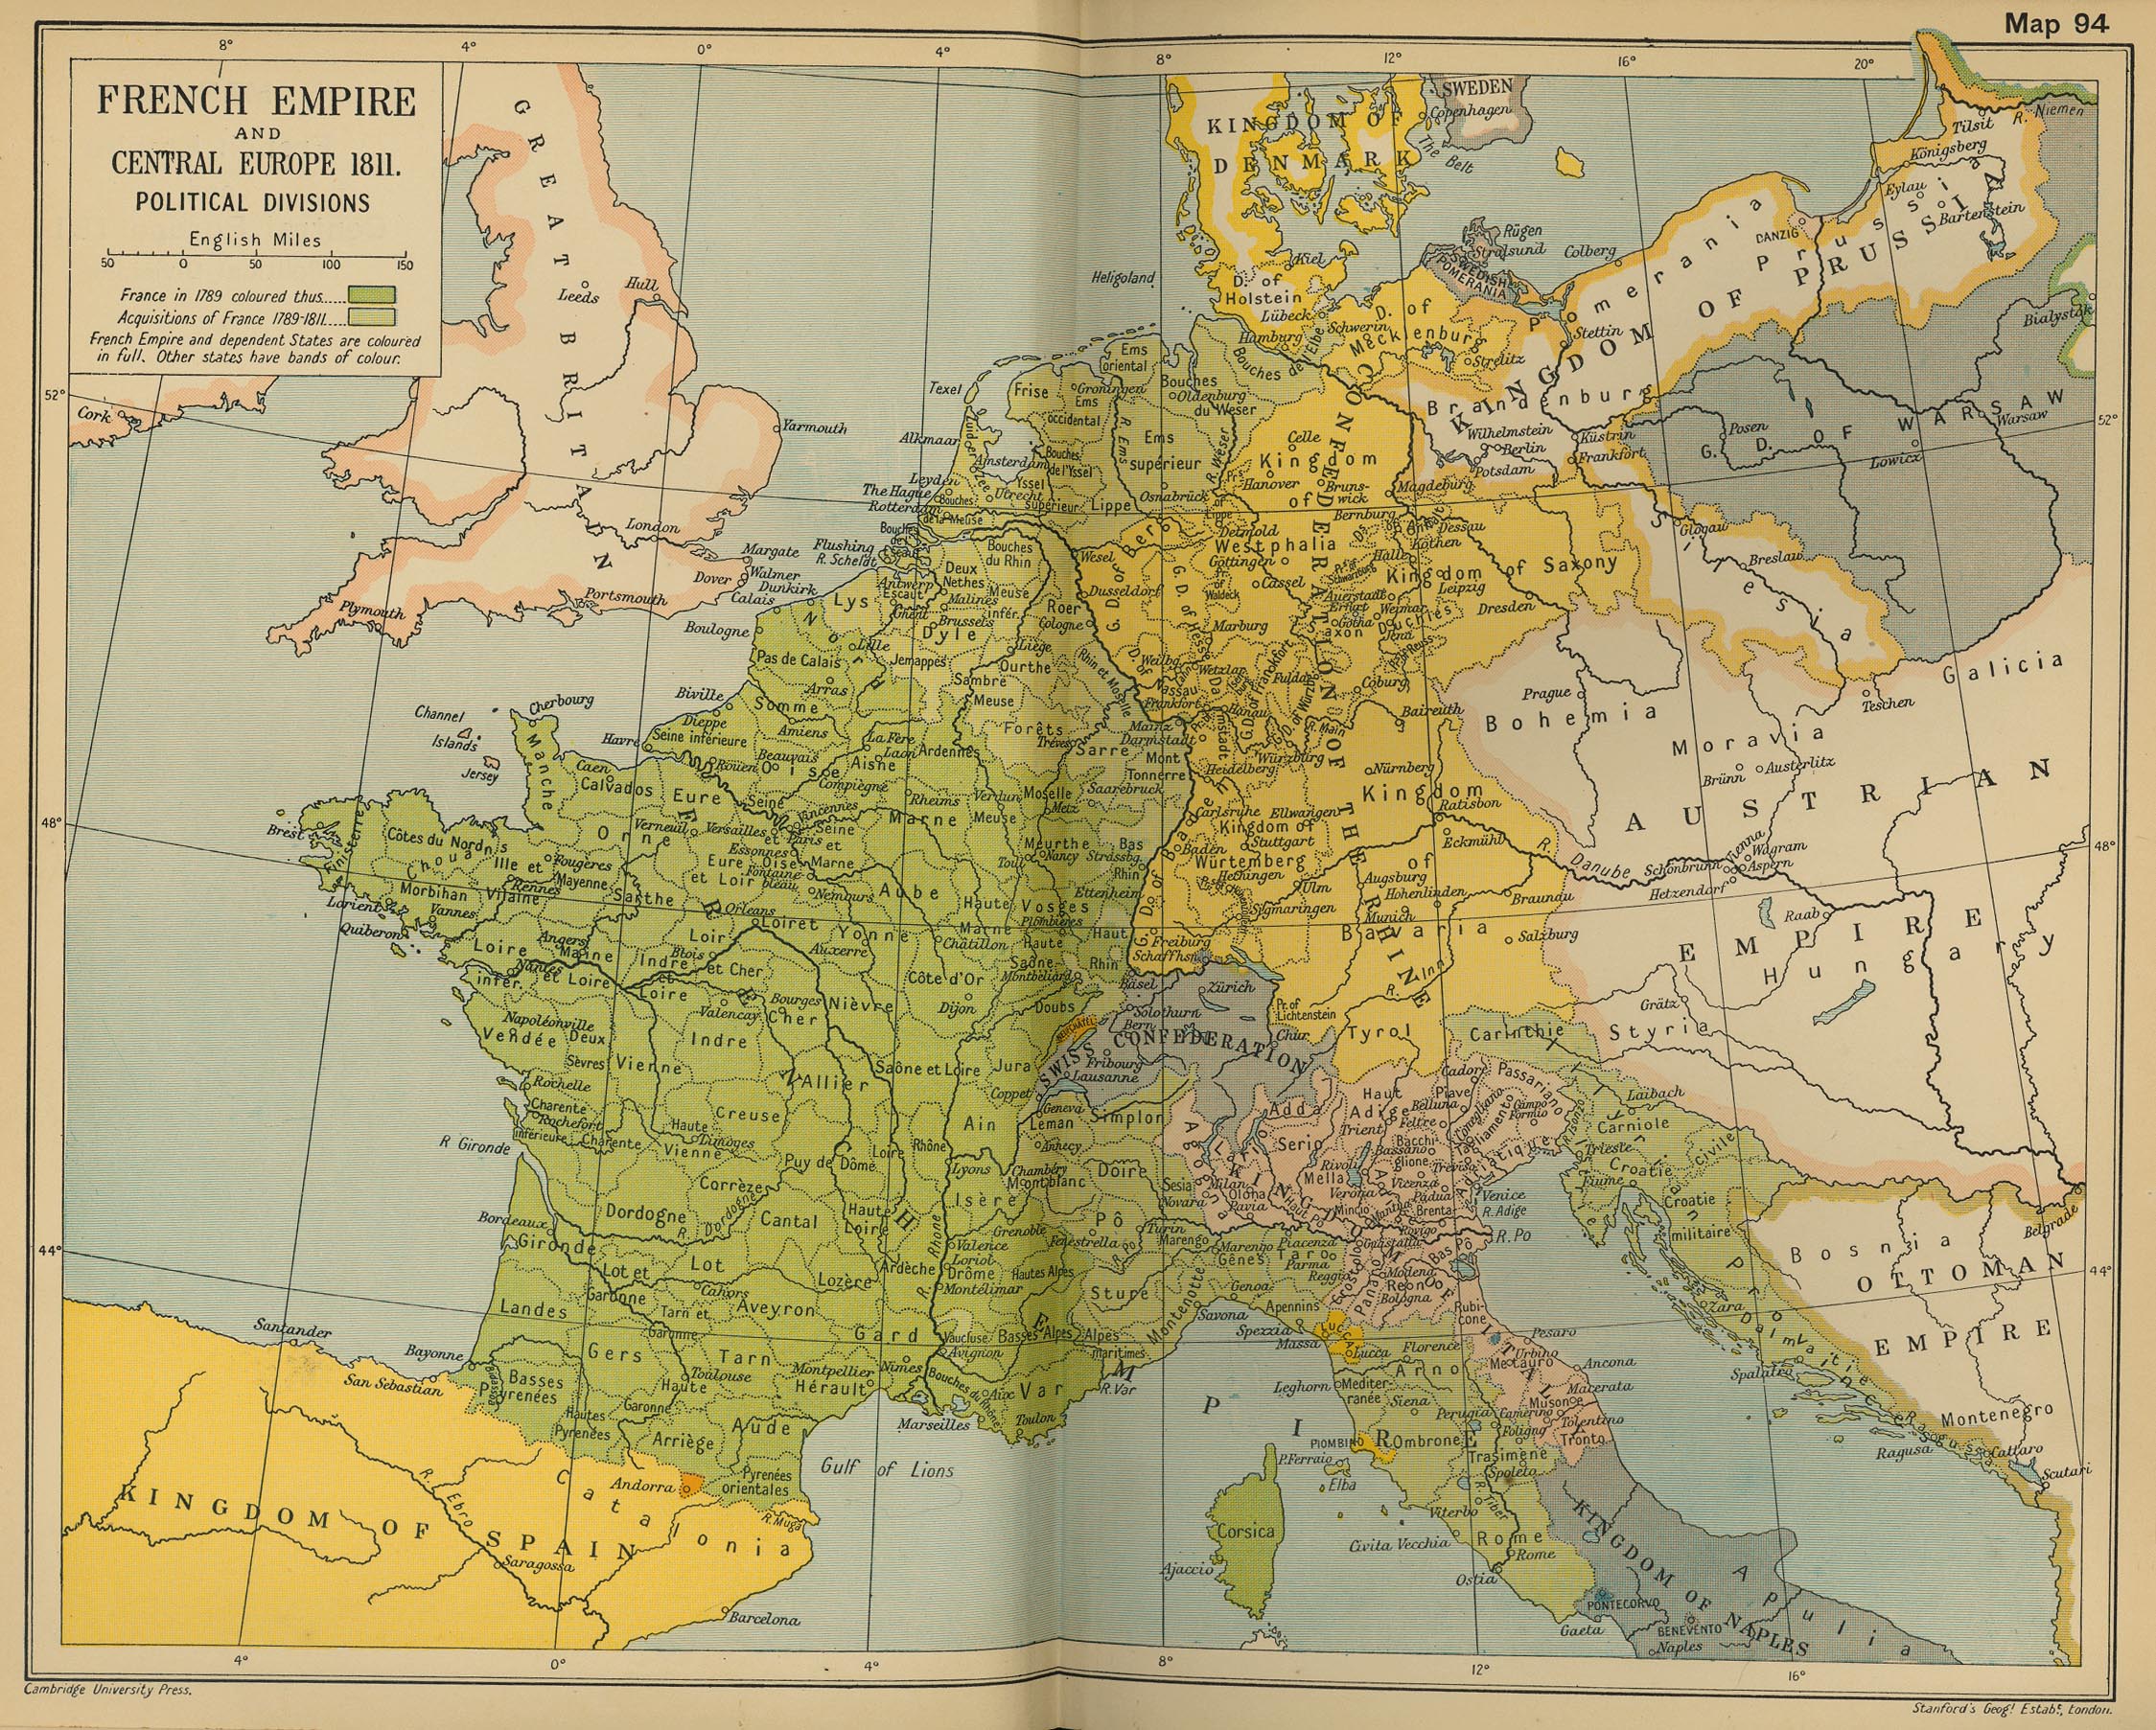 Map of Central Europe and the French Empire in 1811